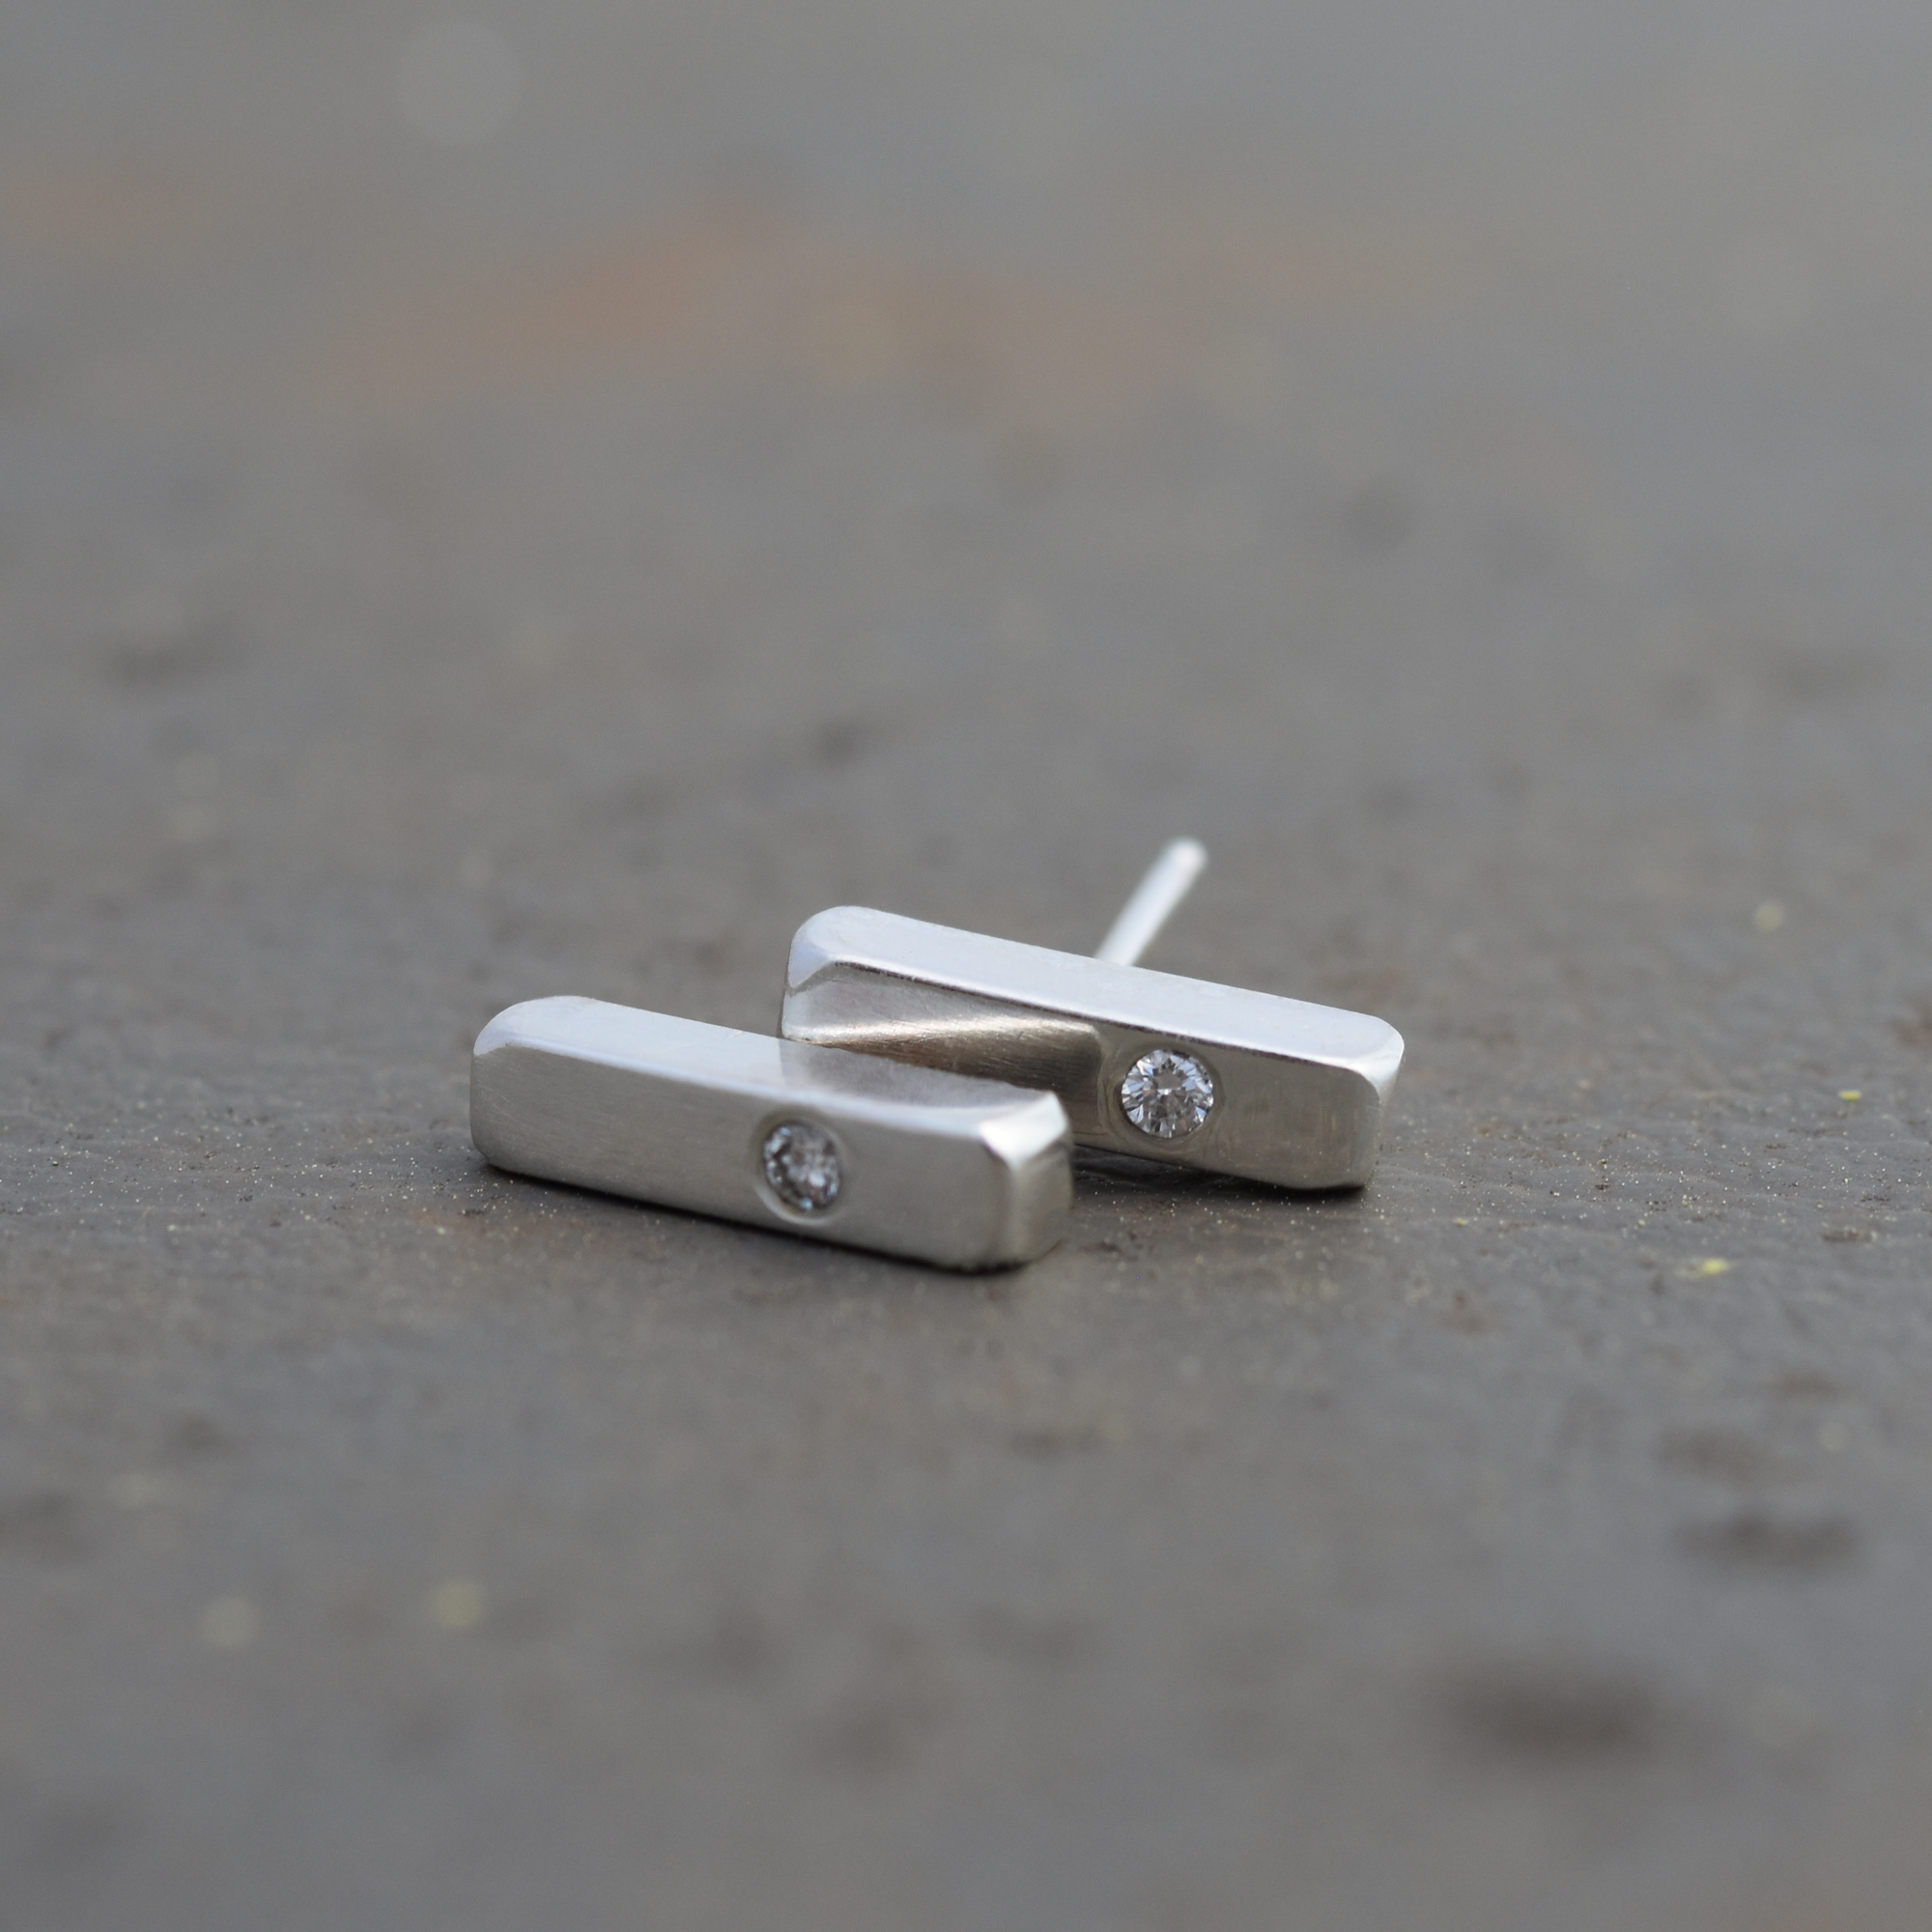 Half inch sterling silver bar studs with a 2 mm diamond to add a little bit of bling.